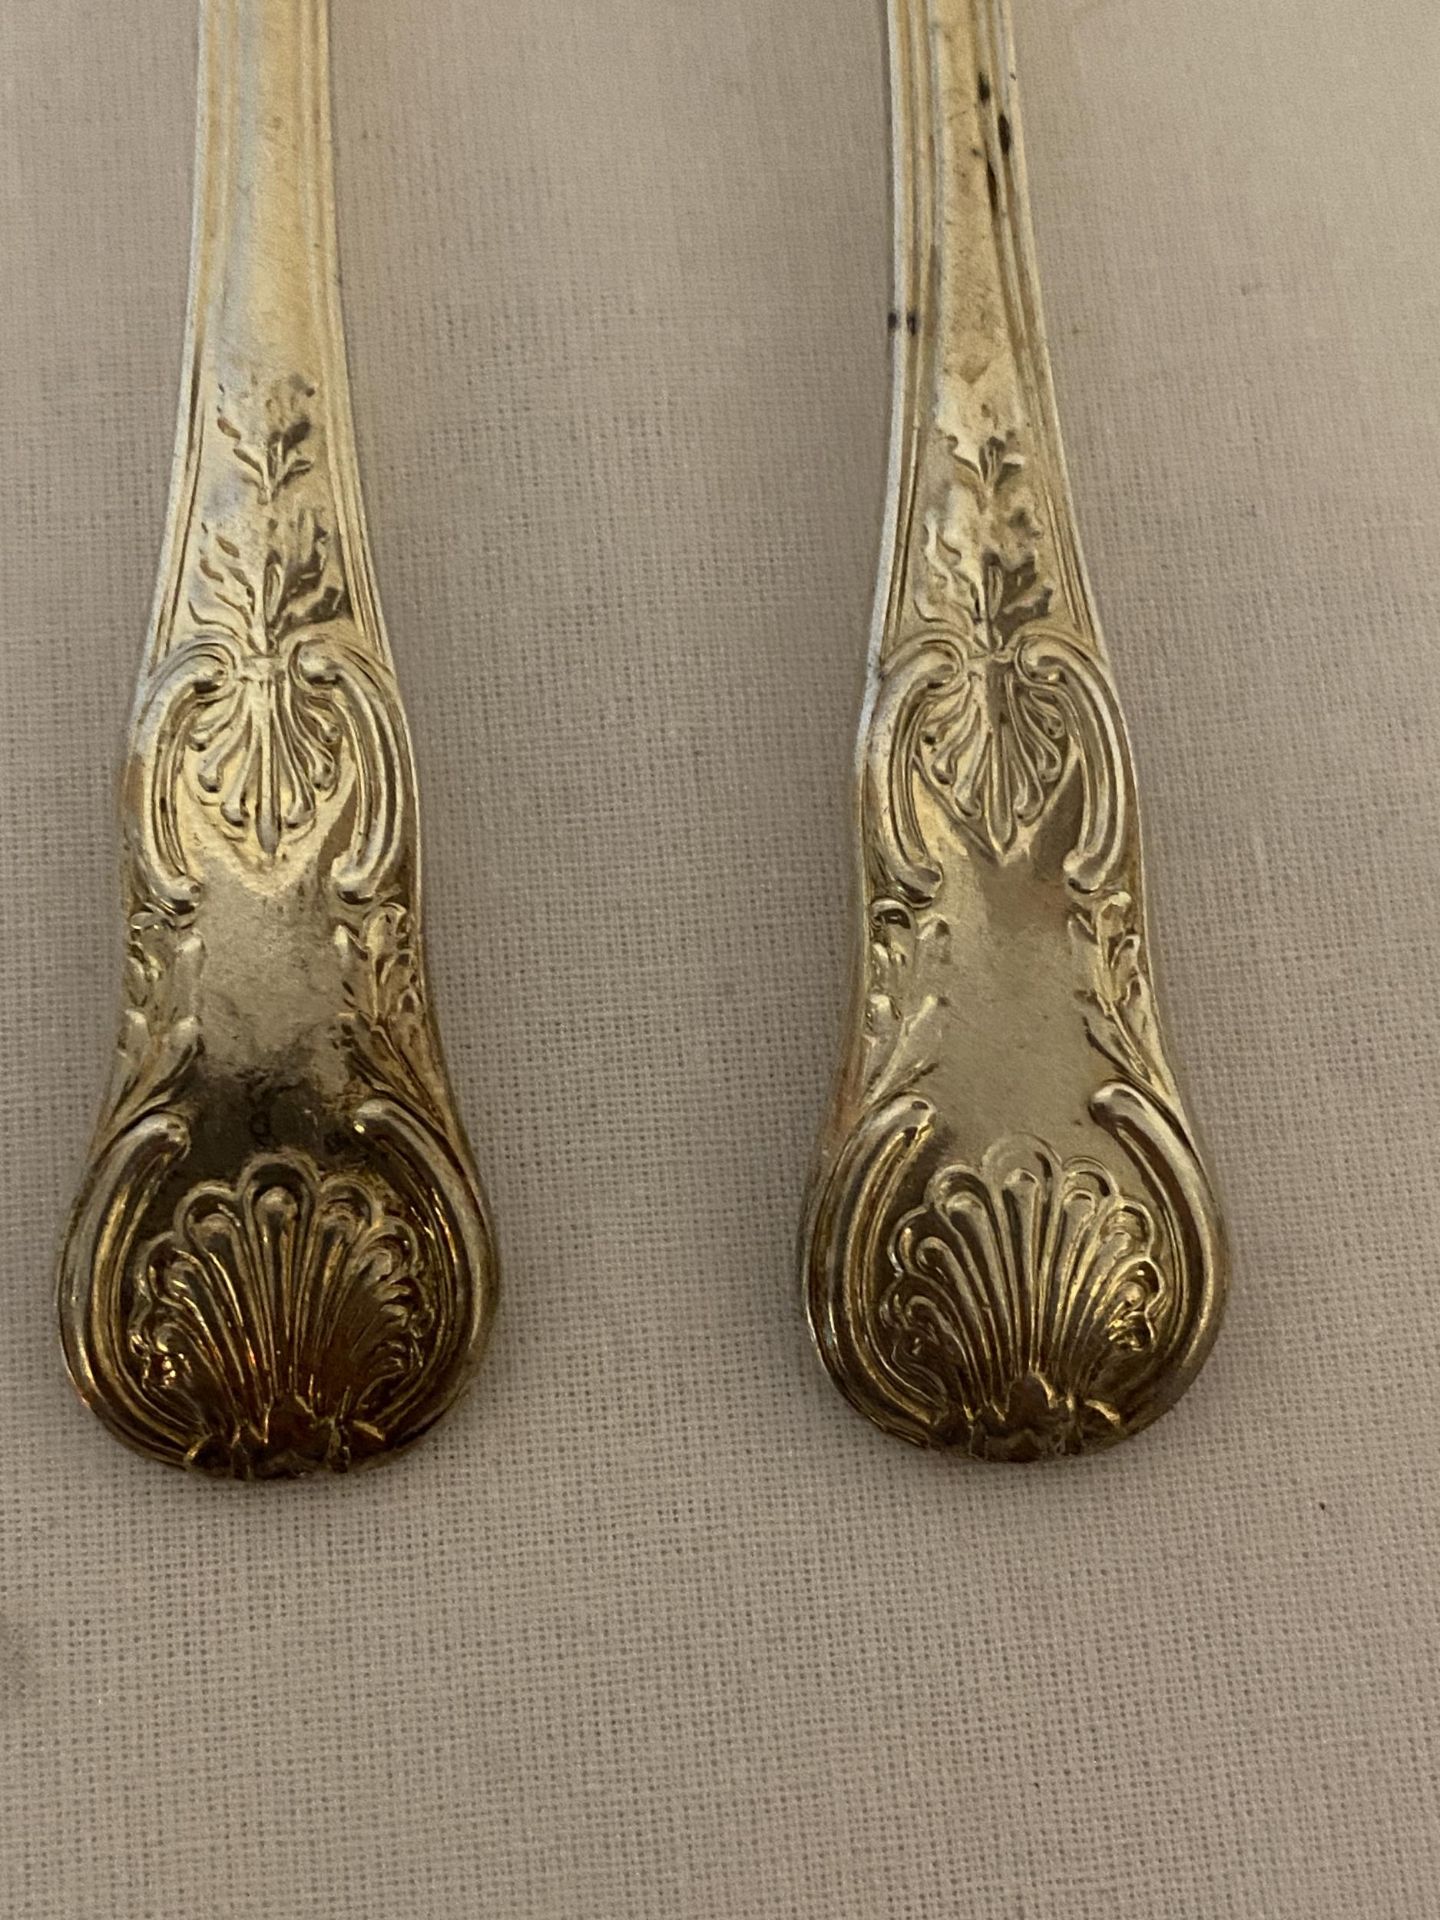 A PAIR OF WILLIAM IV 1832 HALLMARKED LONDON SILVER TEASPOONS, MAKER W.F, POSSIBLY WILLIAM - Image 4 of 18